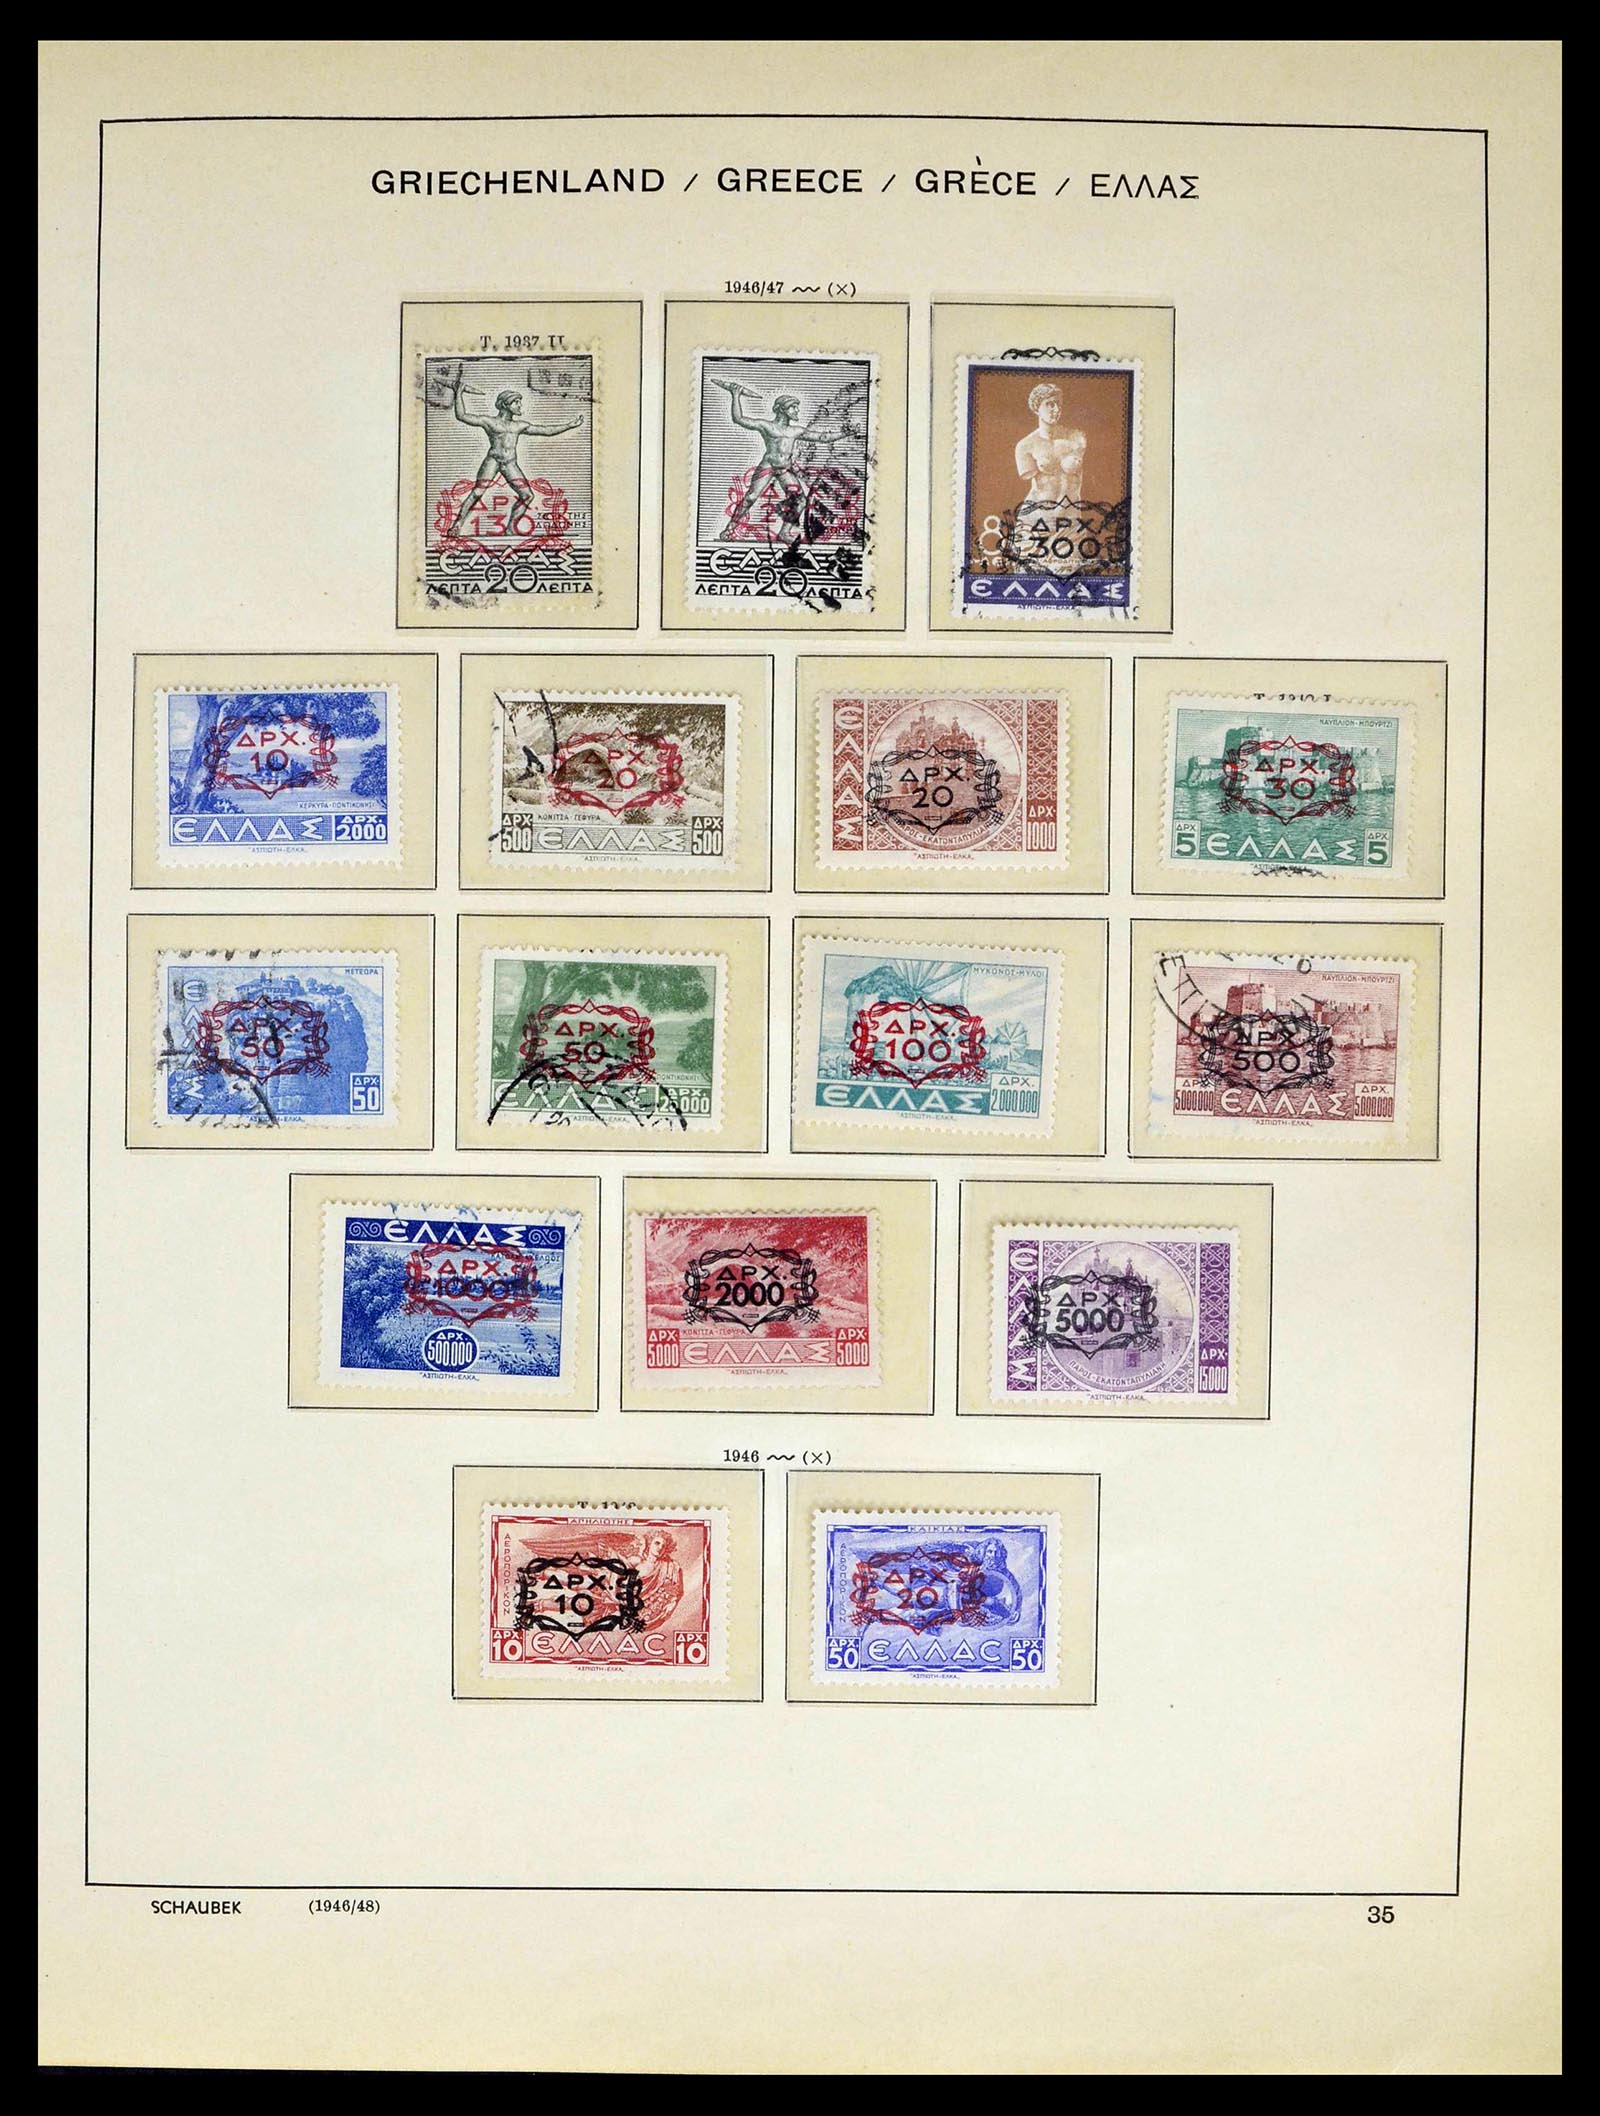 39156 0034 - Stamp collection 39156 Greece 1861-1996.